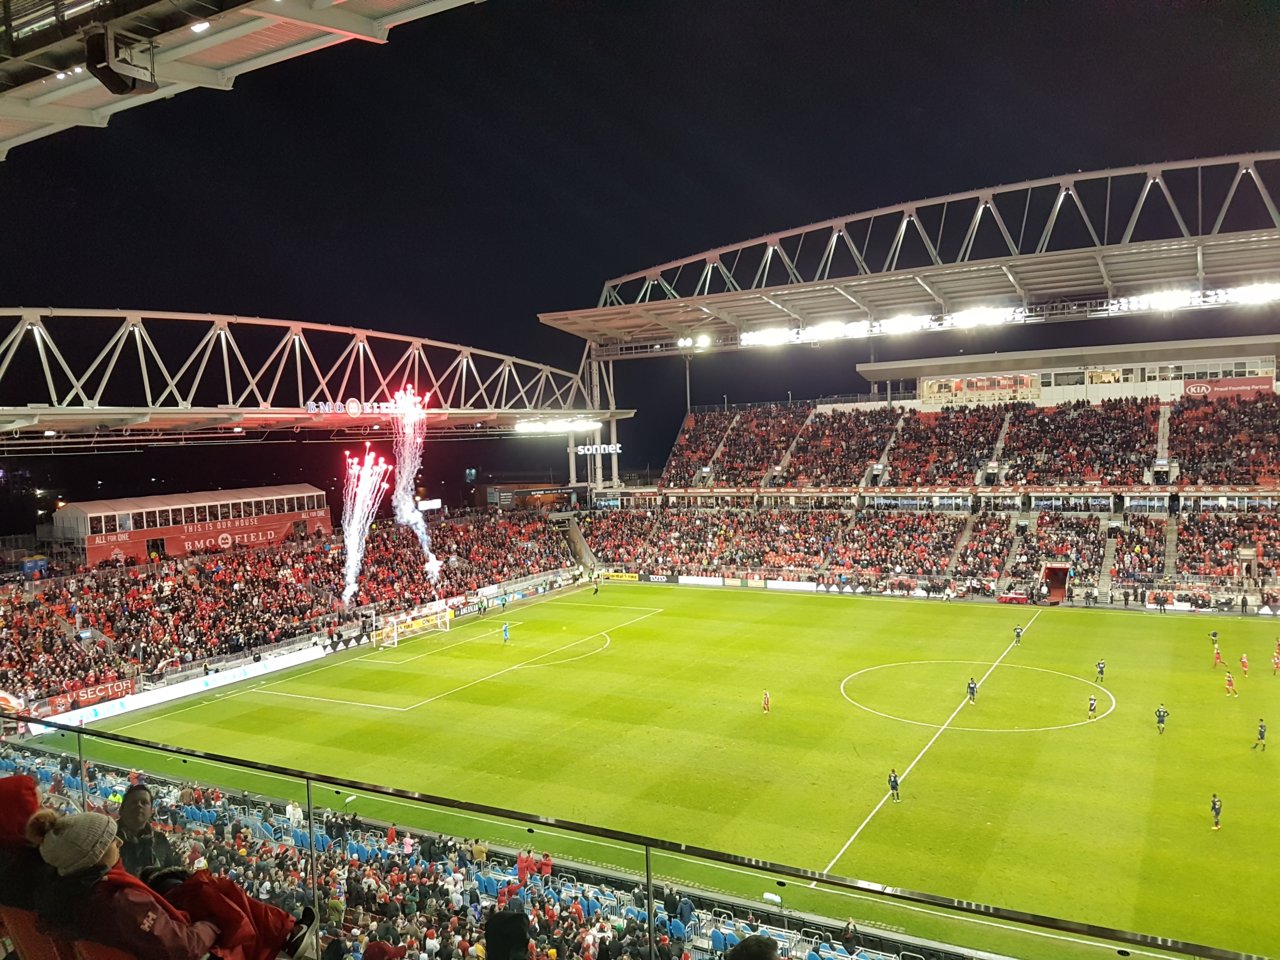 Back at BMO Field, Toronto FC hopes home is where the wins are